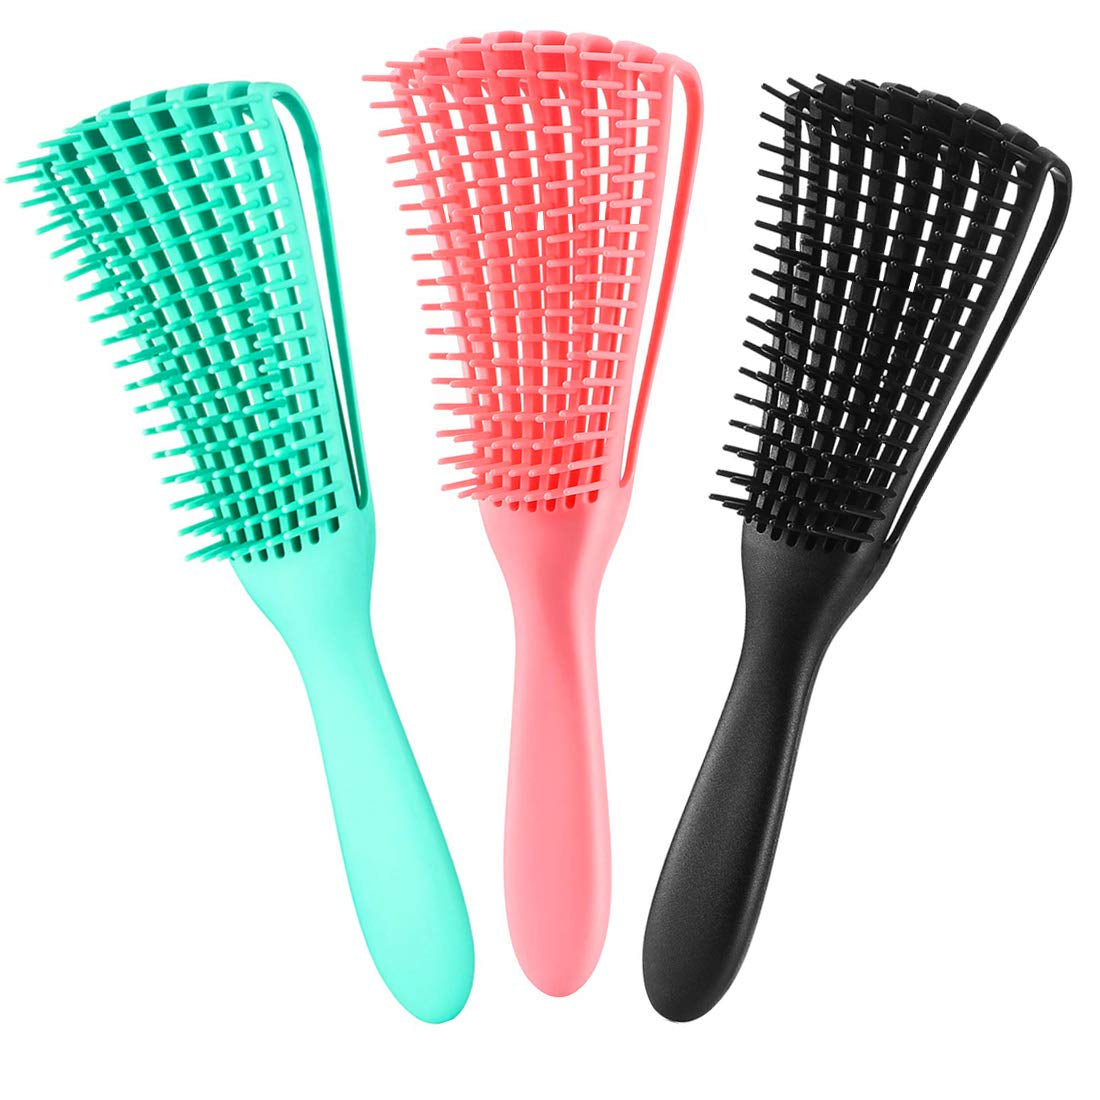 3 Pack Detangler Brush for Natural Hair, Afro America/African Hair Textured 3A to 4C Kinky Wavy/Curly/Coily/Wet/Dry/Oil/Thick/Long Hair, Exfoliating Your Scalp for Beautiful